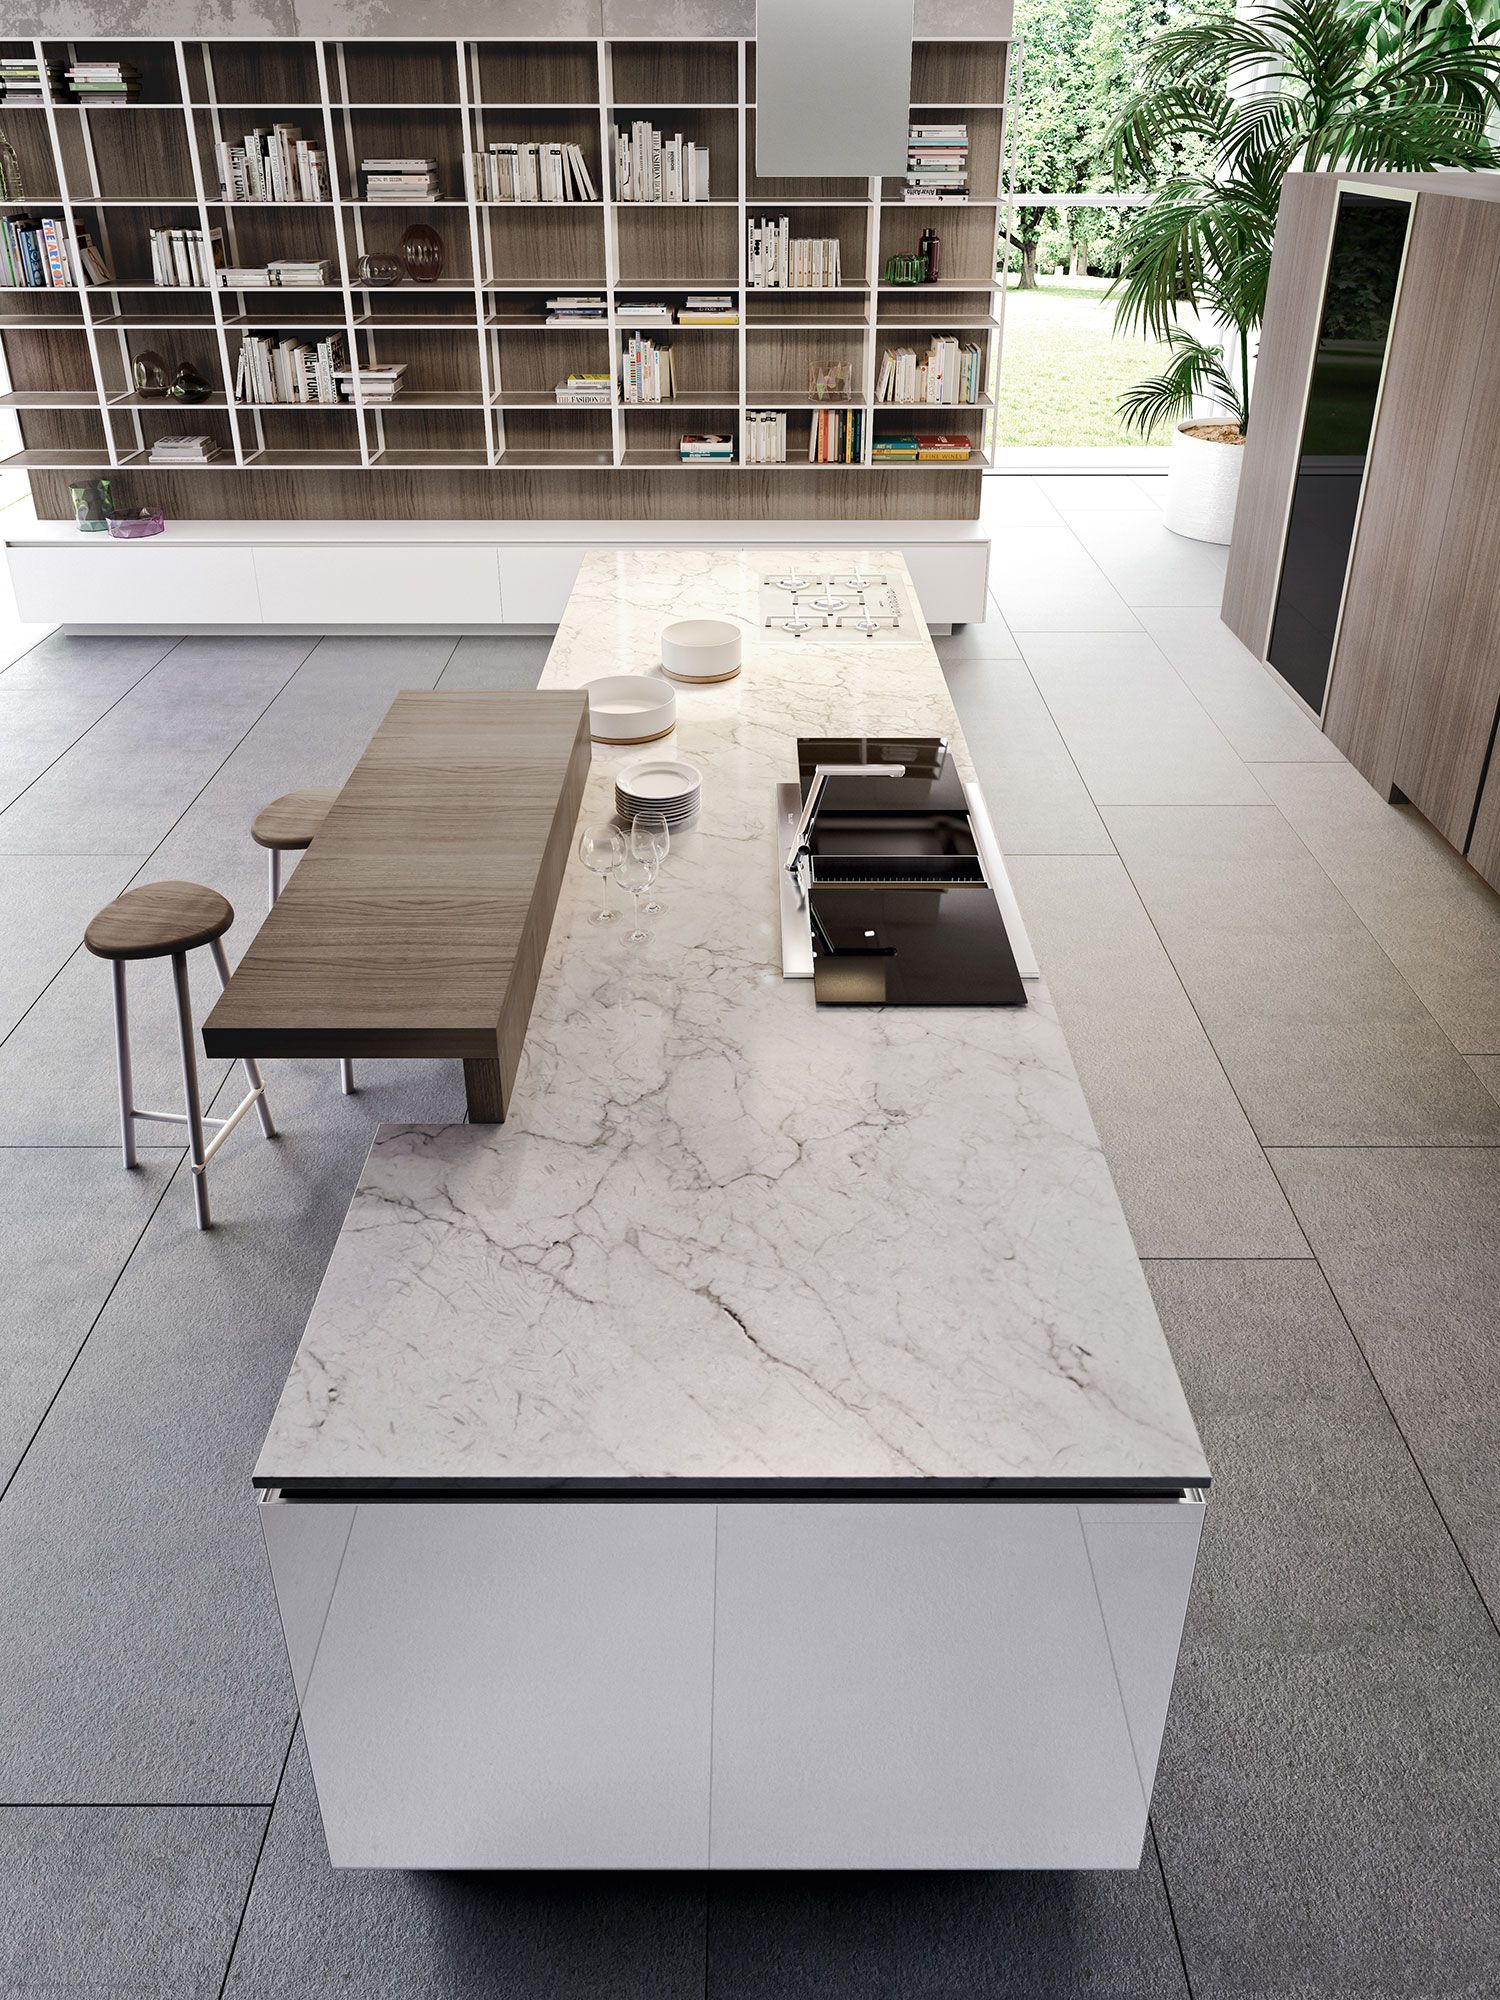 Marble kitchen island countertop along with wooden breakfast bar